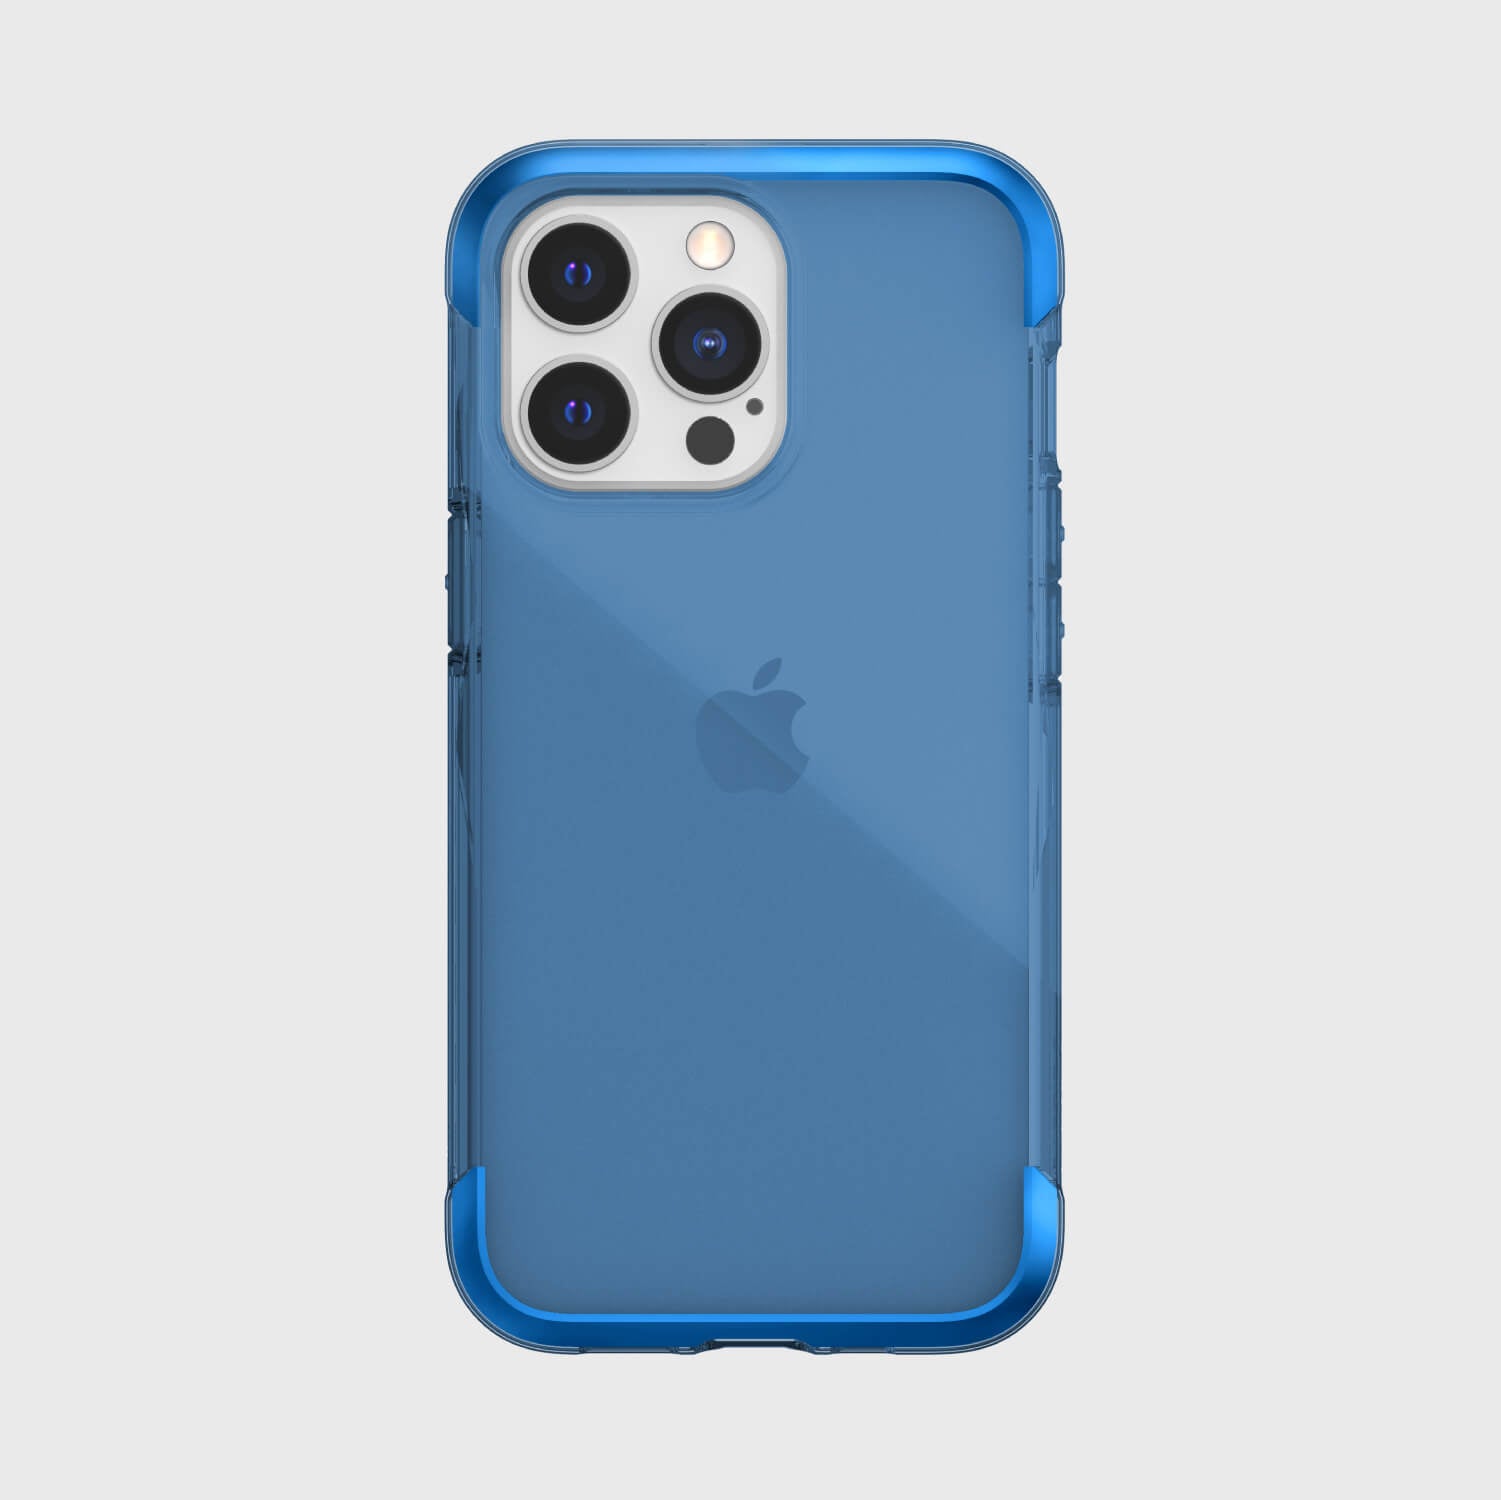 A blue Raptic iPhone 13 Pro Case - AIR providing drop protection and wireless charging compatibility.